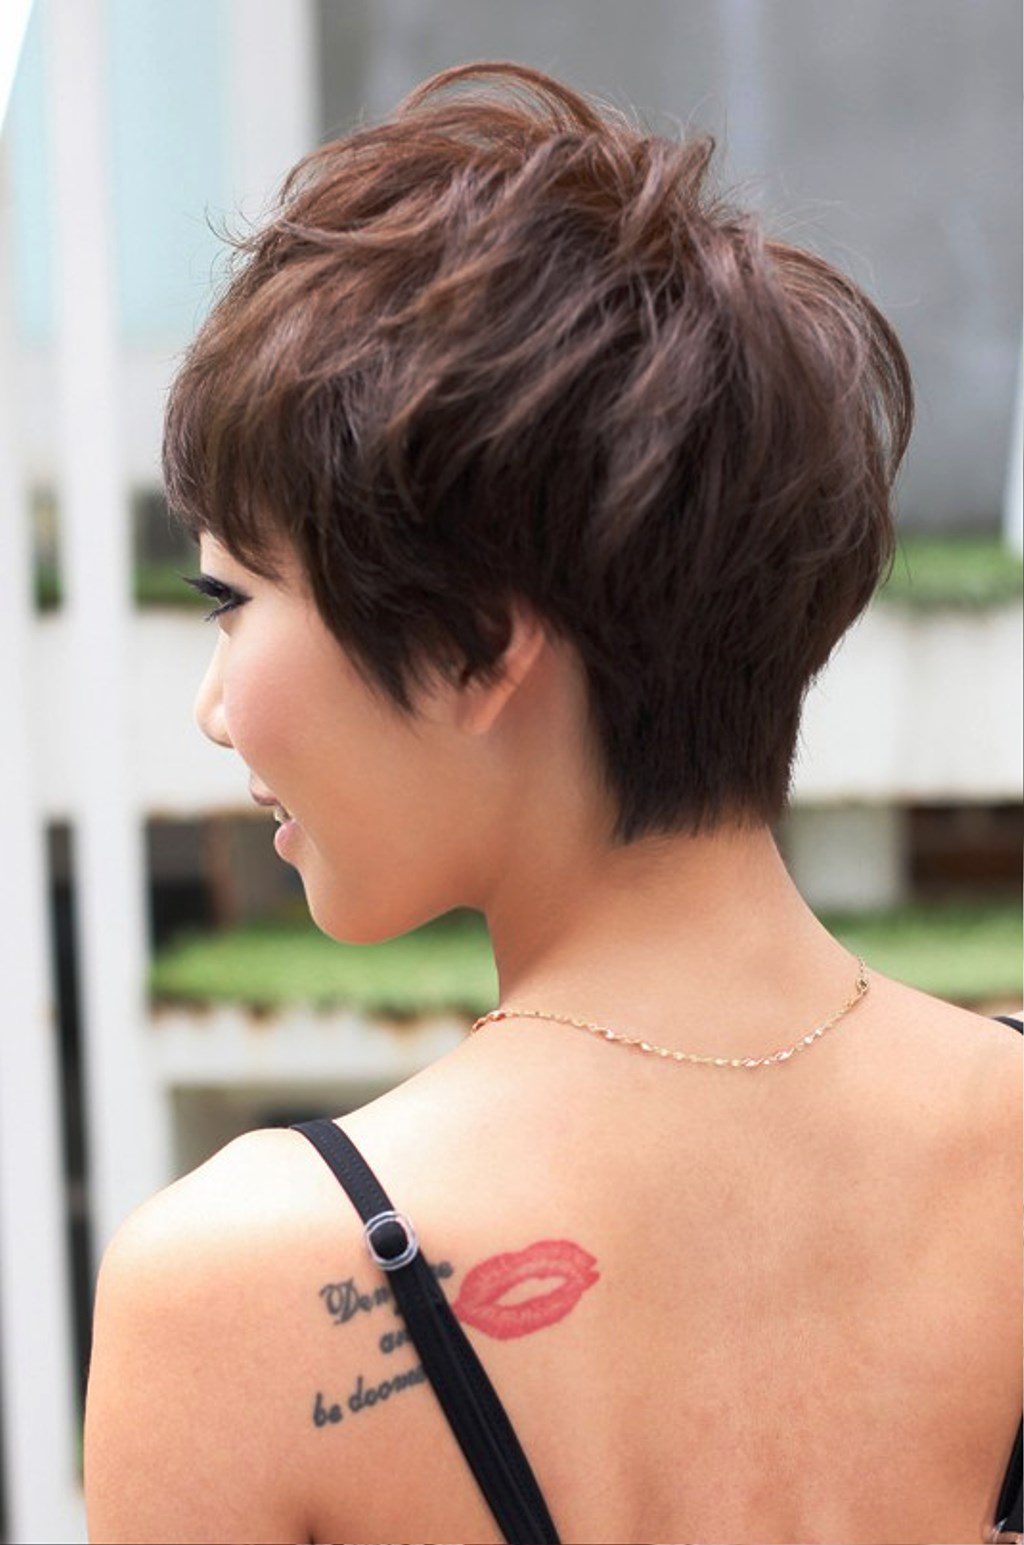 Pictures Of Layered Short Pixie Haircut